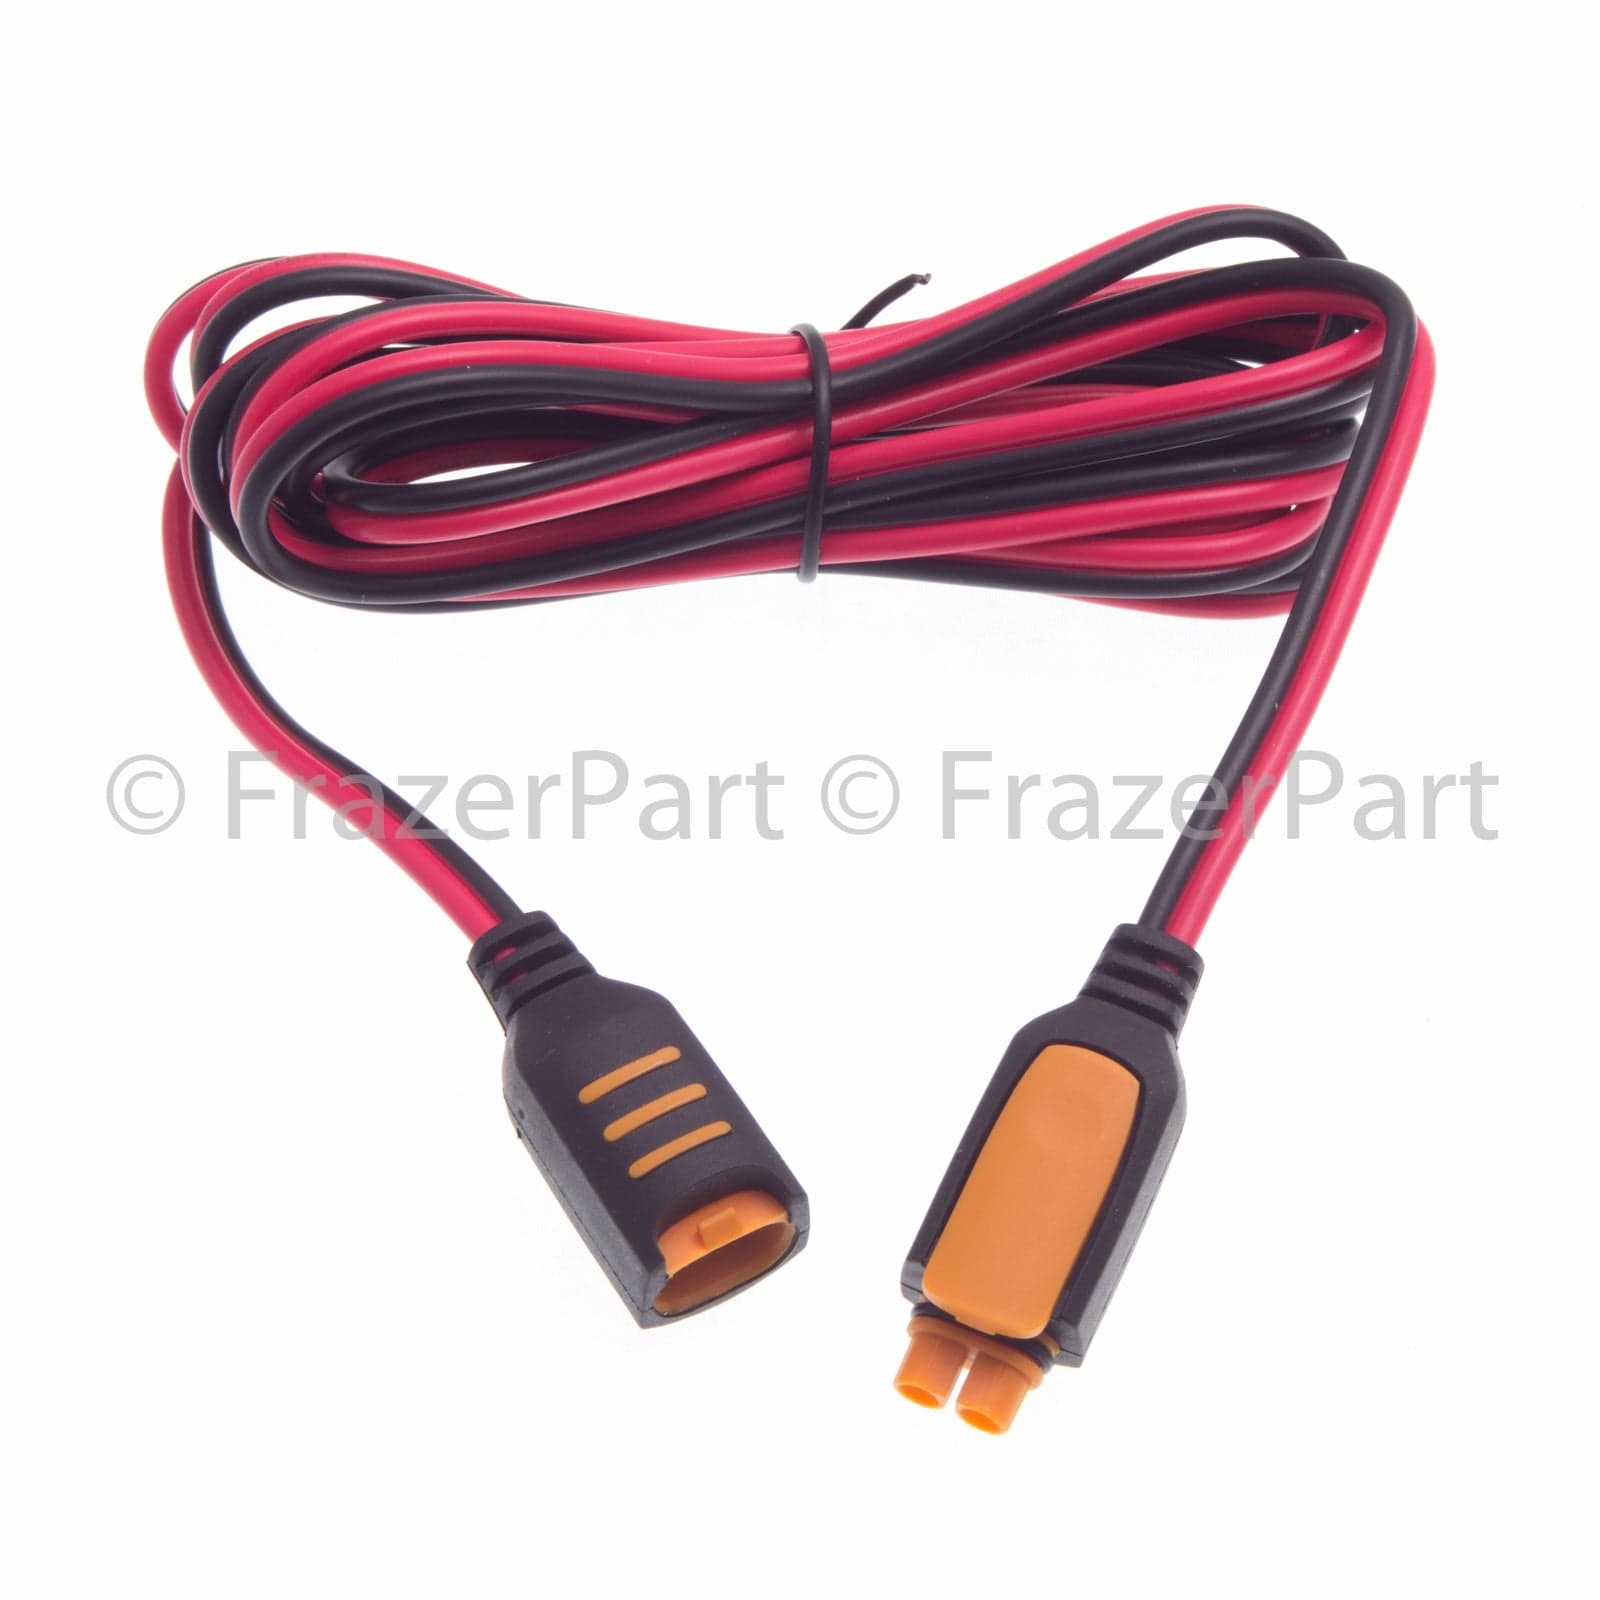 Porsche Charge-o-mat CTEK 2.5m battery charger extension lead and cable